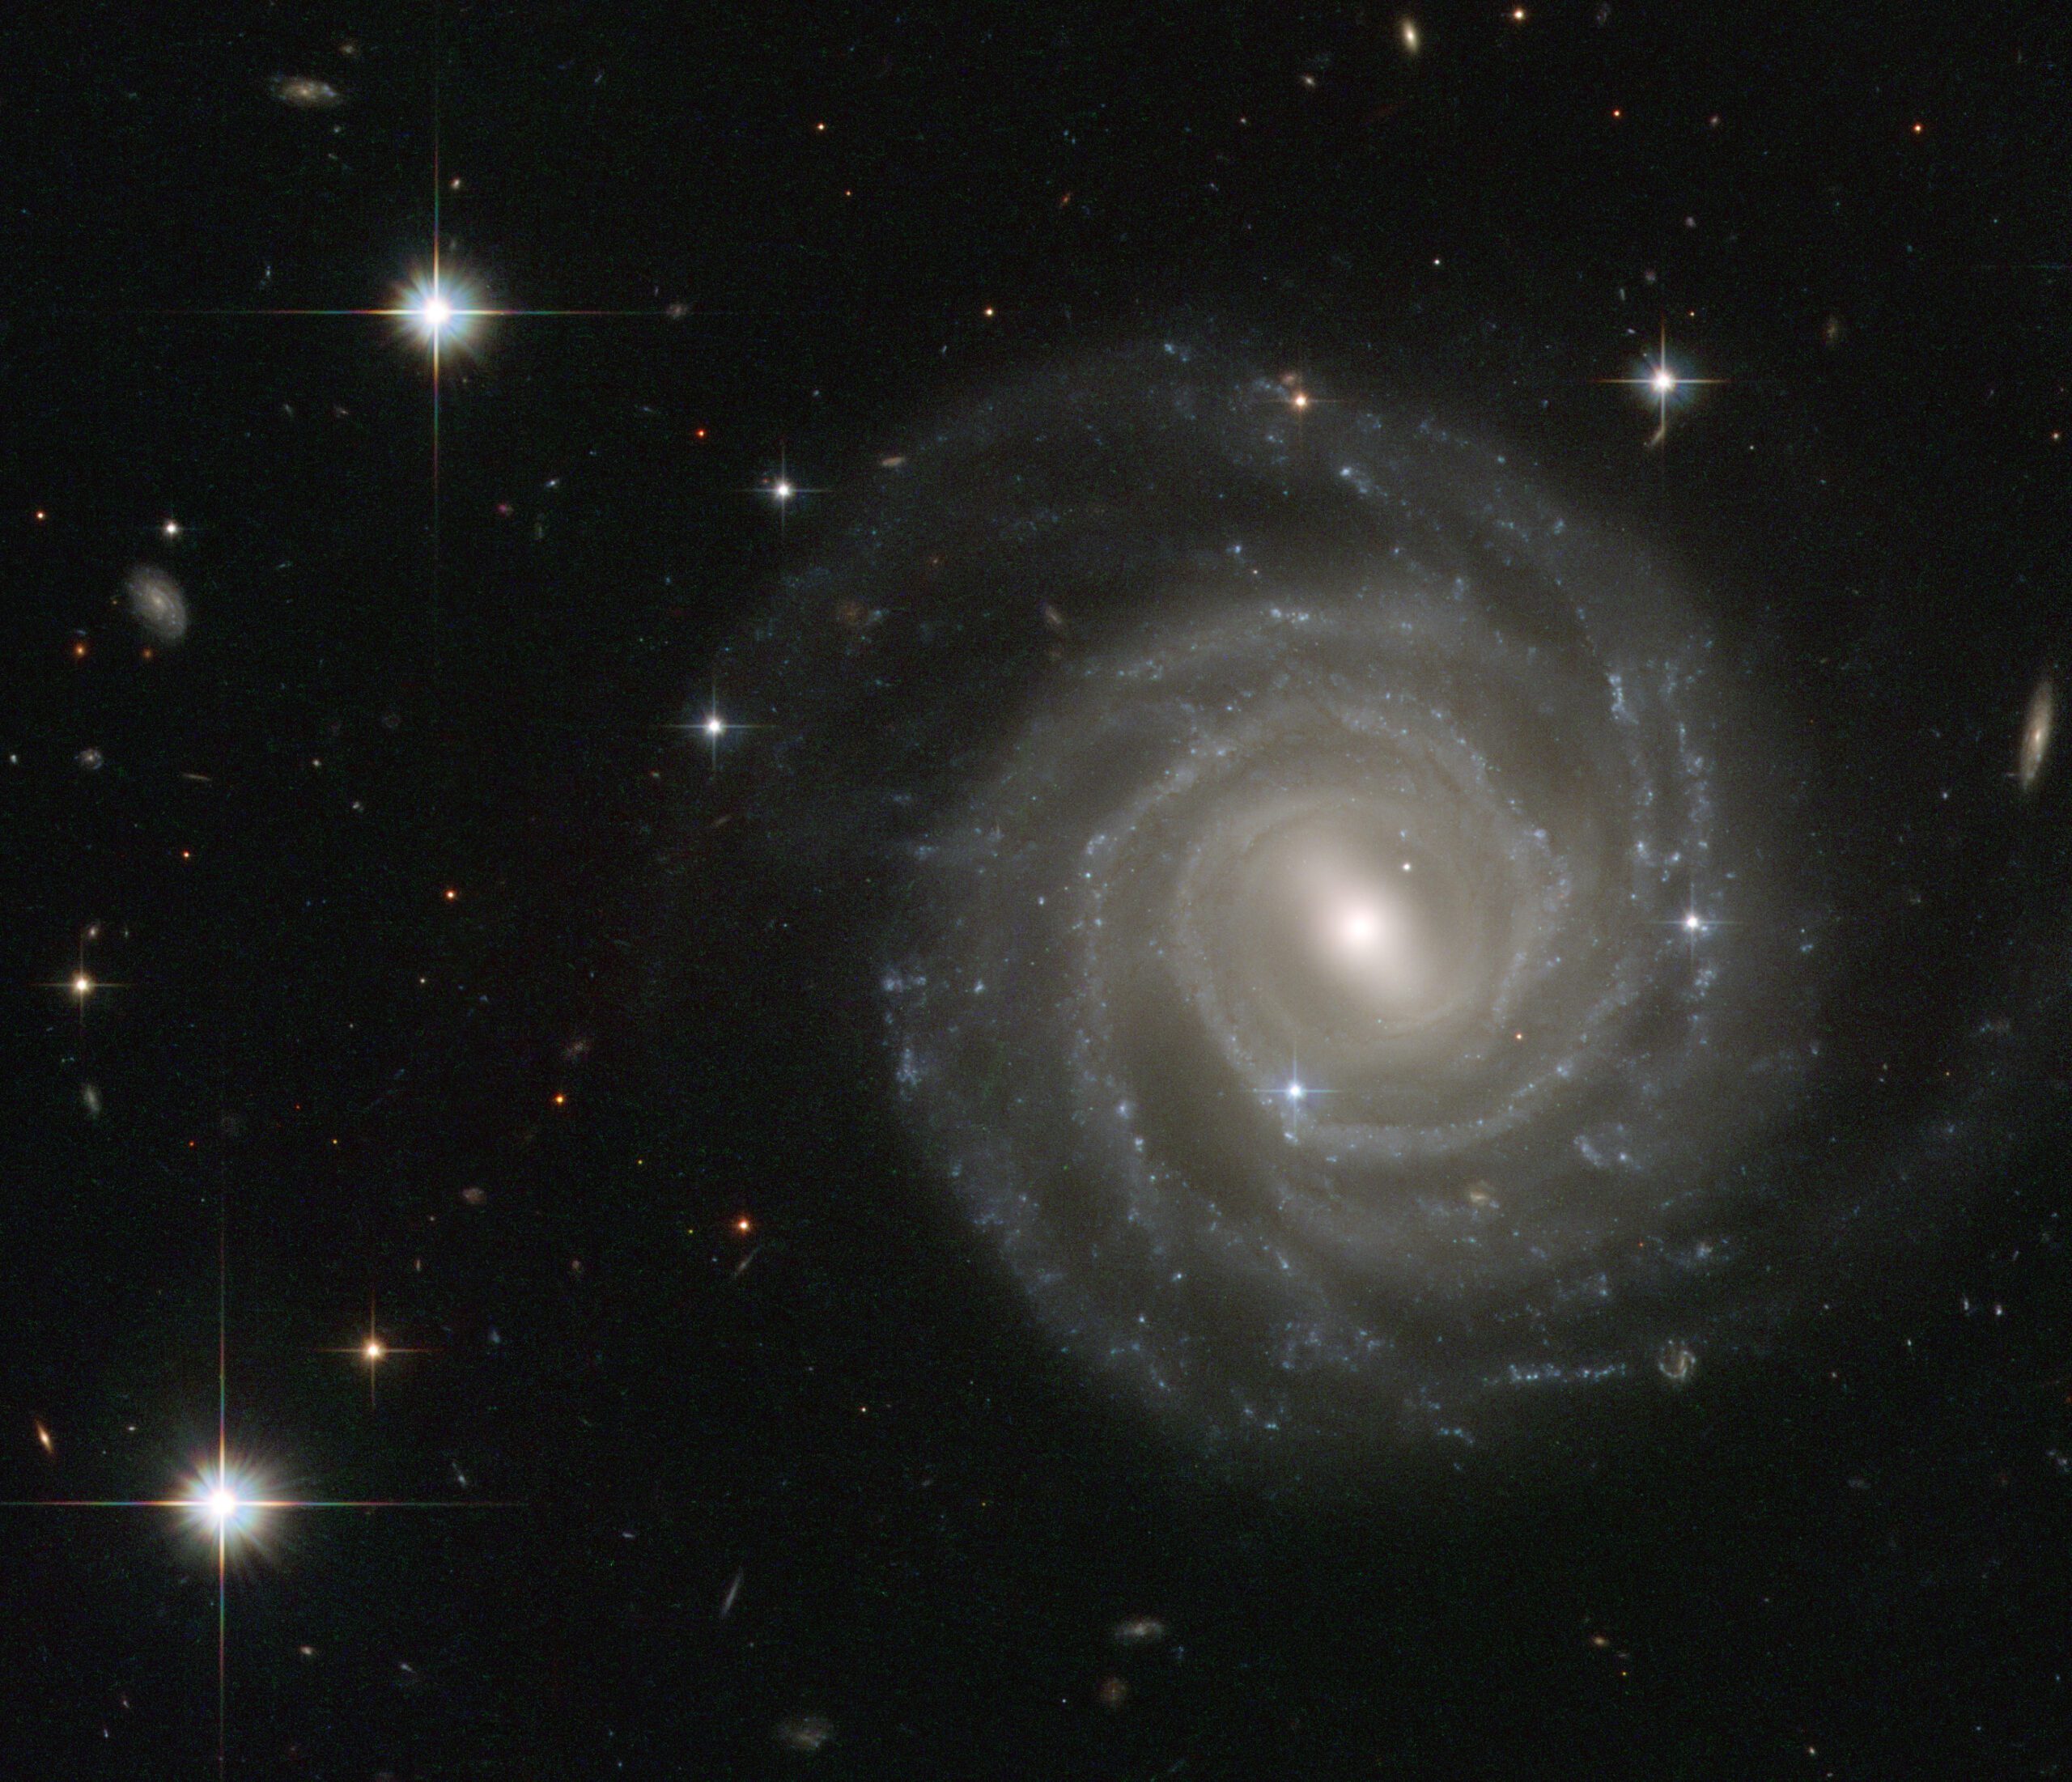 The galaxy captured in this image, called UGC 12158, is posing face-on to the NASA/ESA Hubble Space Telescope’s Advanced Camera for Surveys, revealing its structure in fine detail.